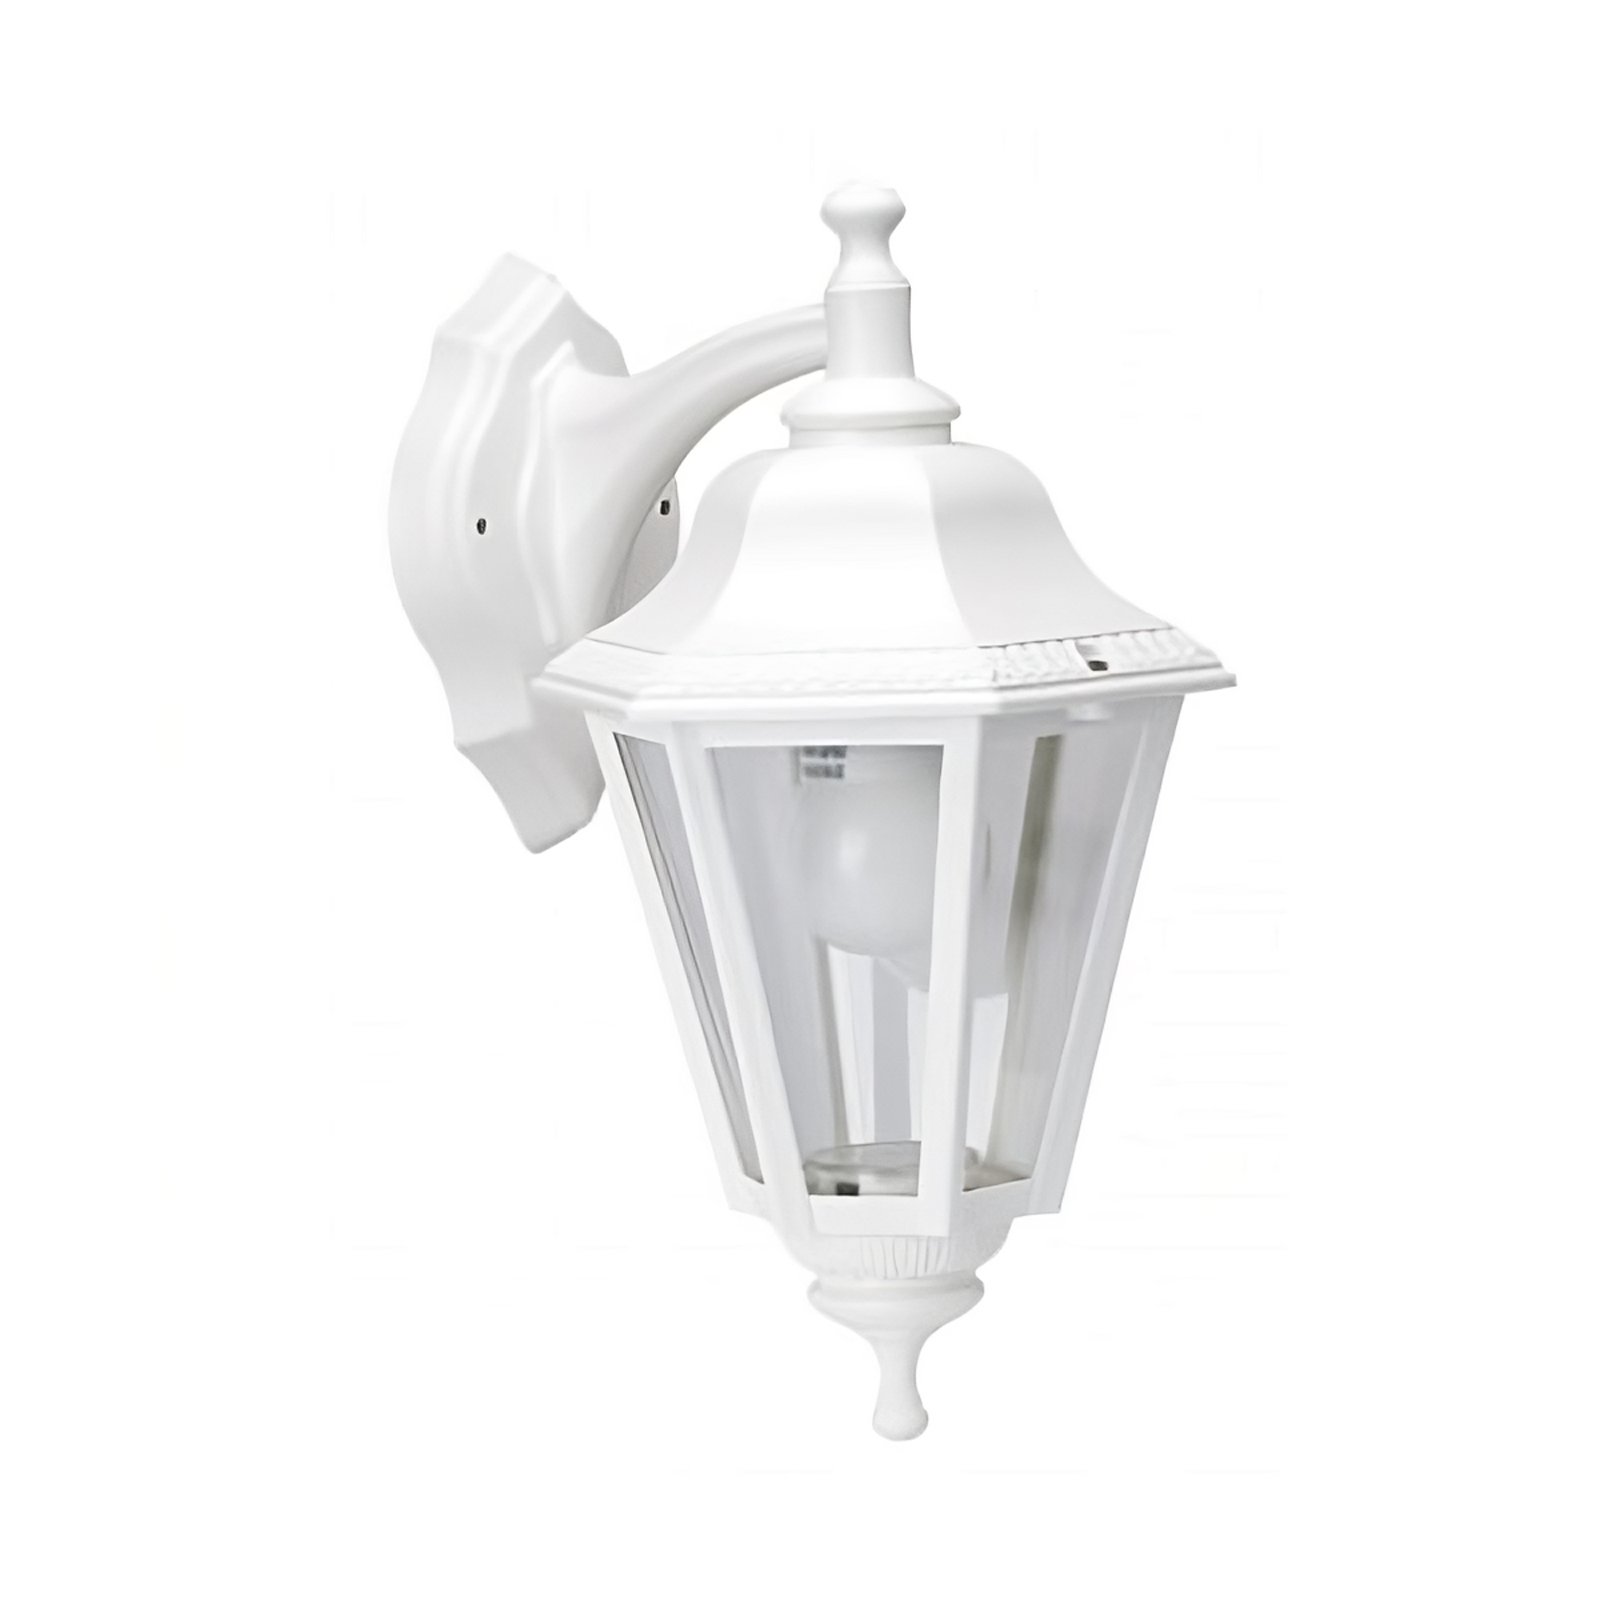 Product image of Castra White Resin Exterior Coach Lantern